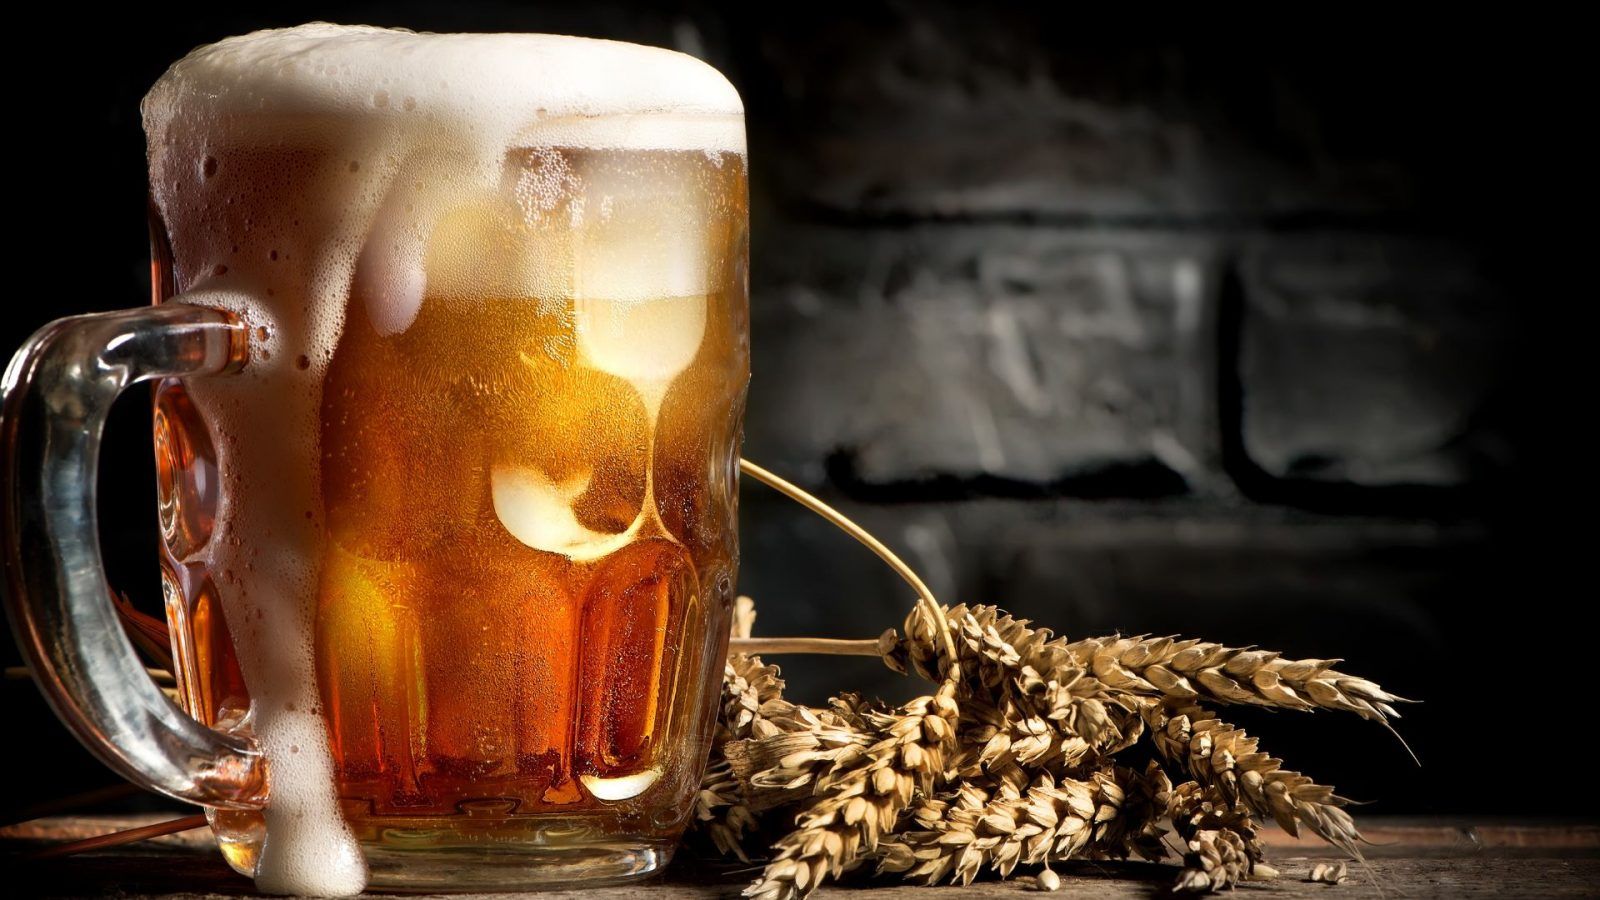 International beer day: Best brews in India to crack open for a refreshing weekend